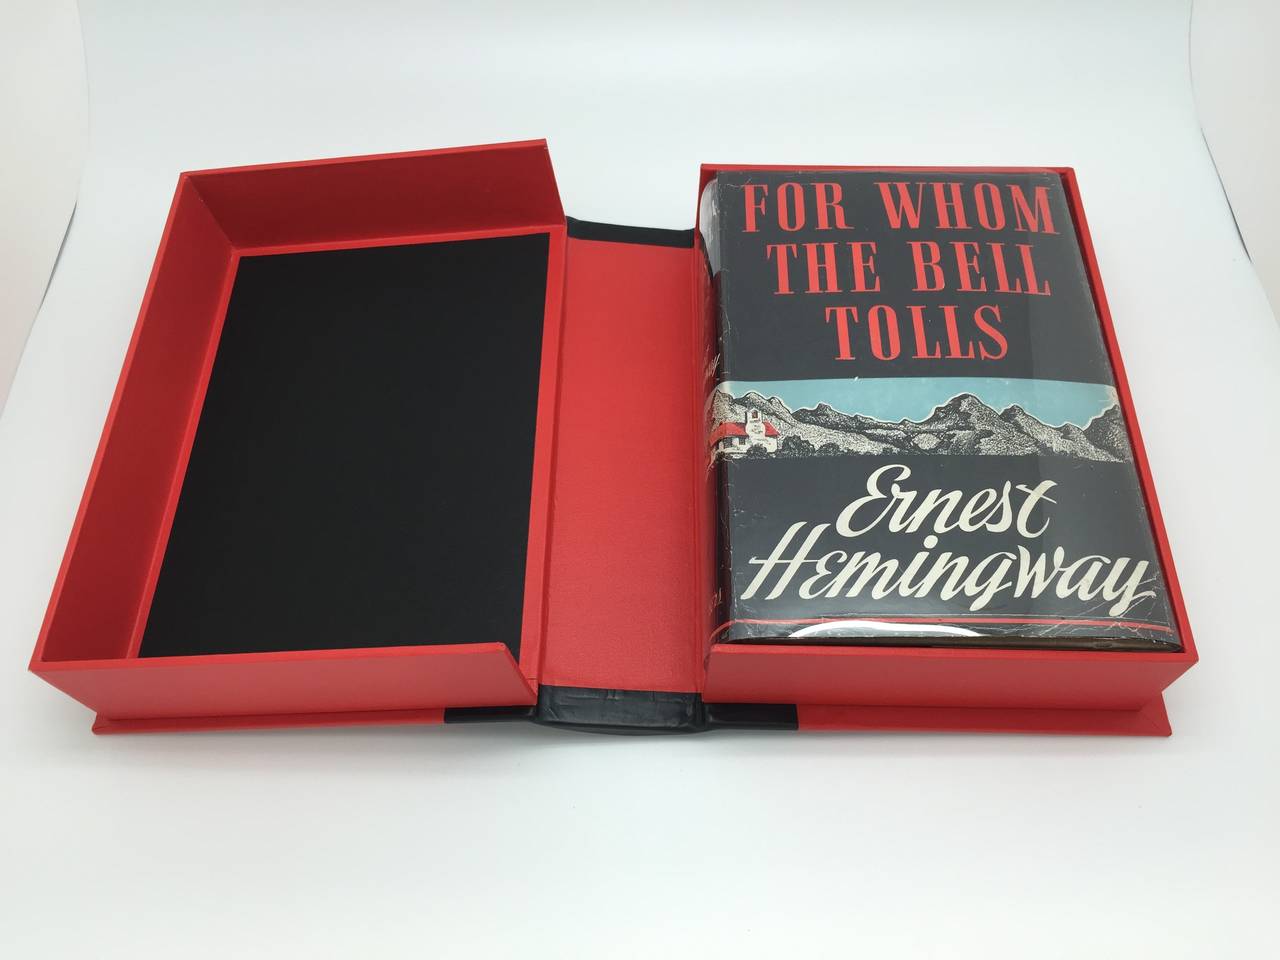 This is a striking, first edition copy of Hemingway's classic novel surrounding the events of the Spanish Civil War and the exploits of Robert Jordan, an American fighting on behalf of guerrillas during the conflict.  The book includes the autograph